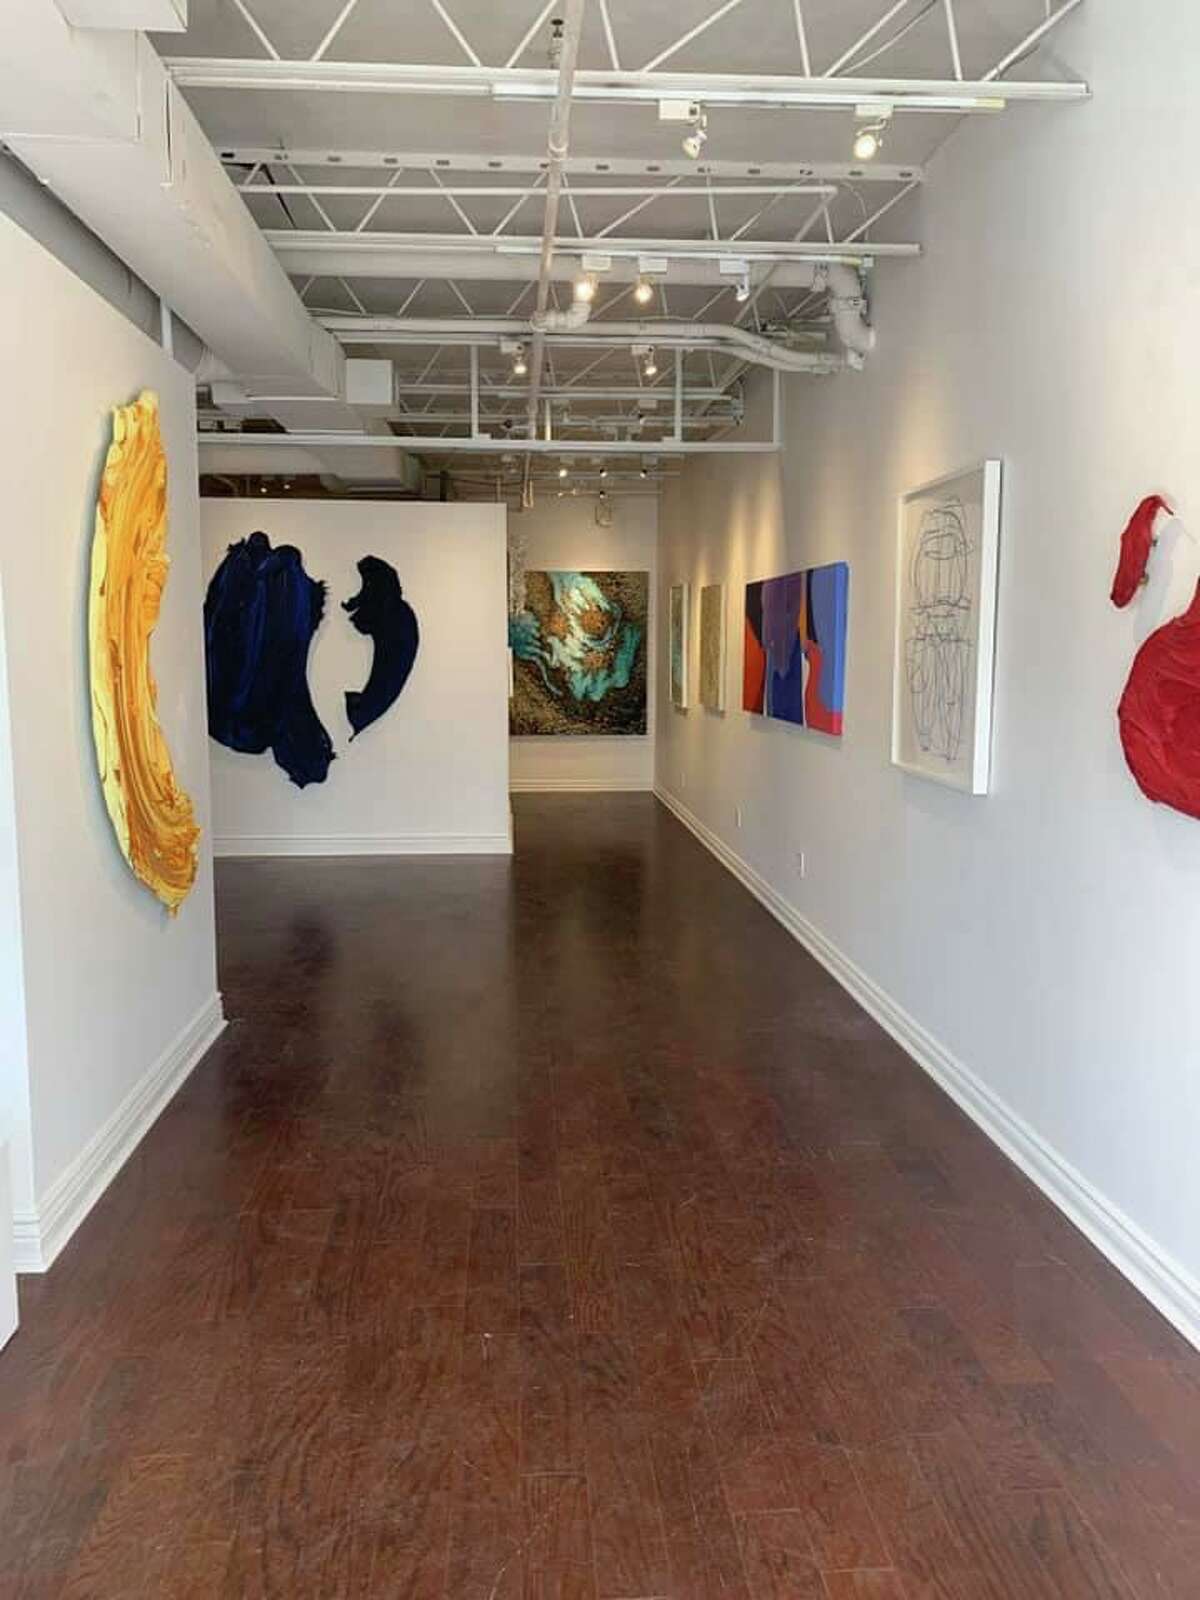 A group show, “Unfolding Dialogue: Four Voices,” has opened at Amy Simon’s new gallery space in Westport.